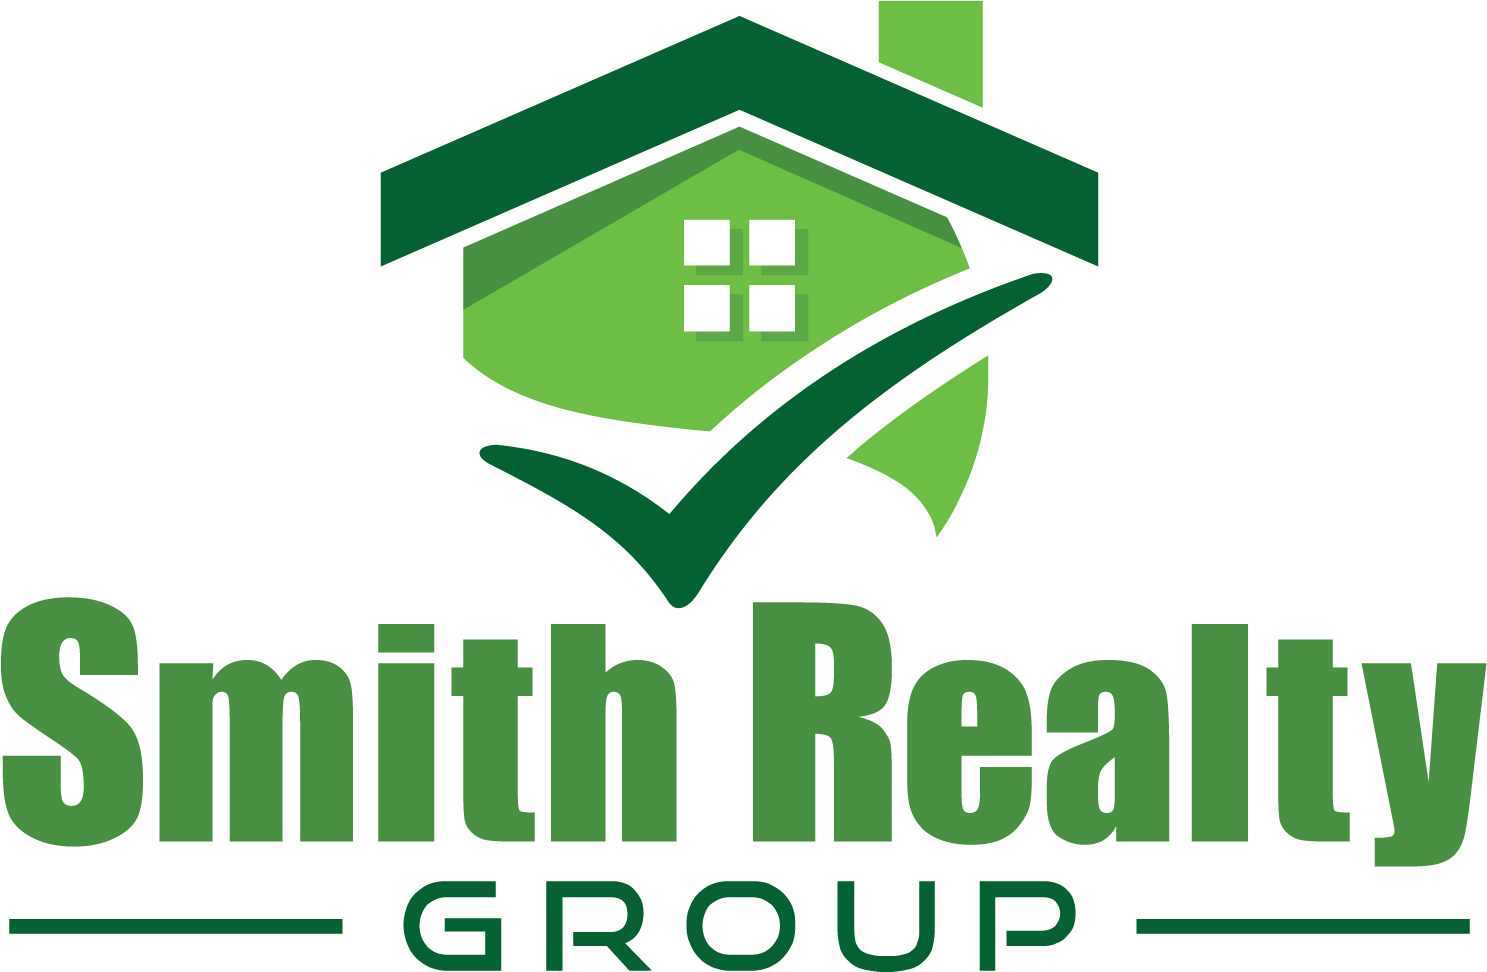 Smith Realty Group Indy Realtor - Clear Secured Services Pvt Ltd (1650x1200)